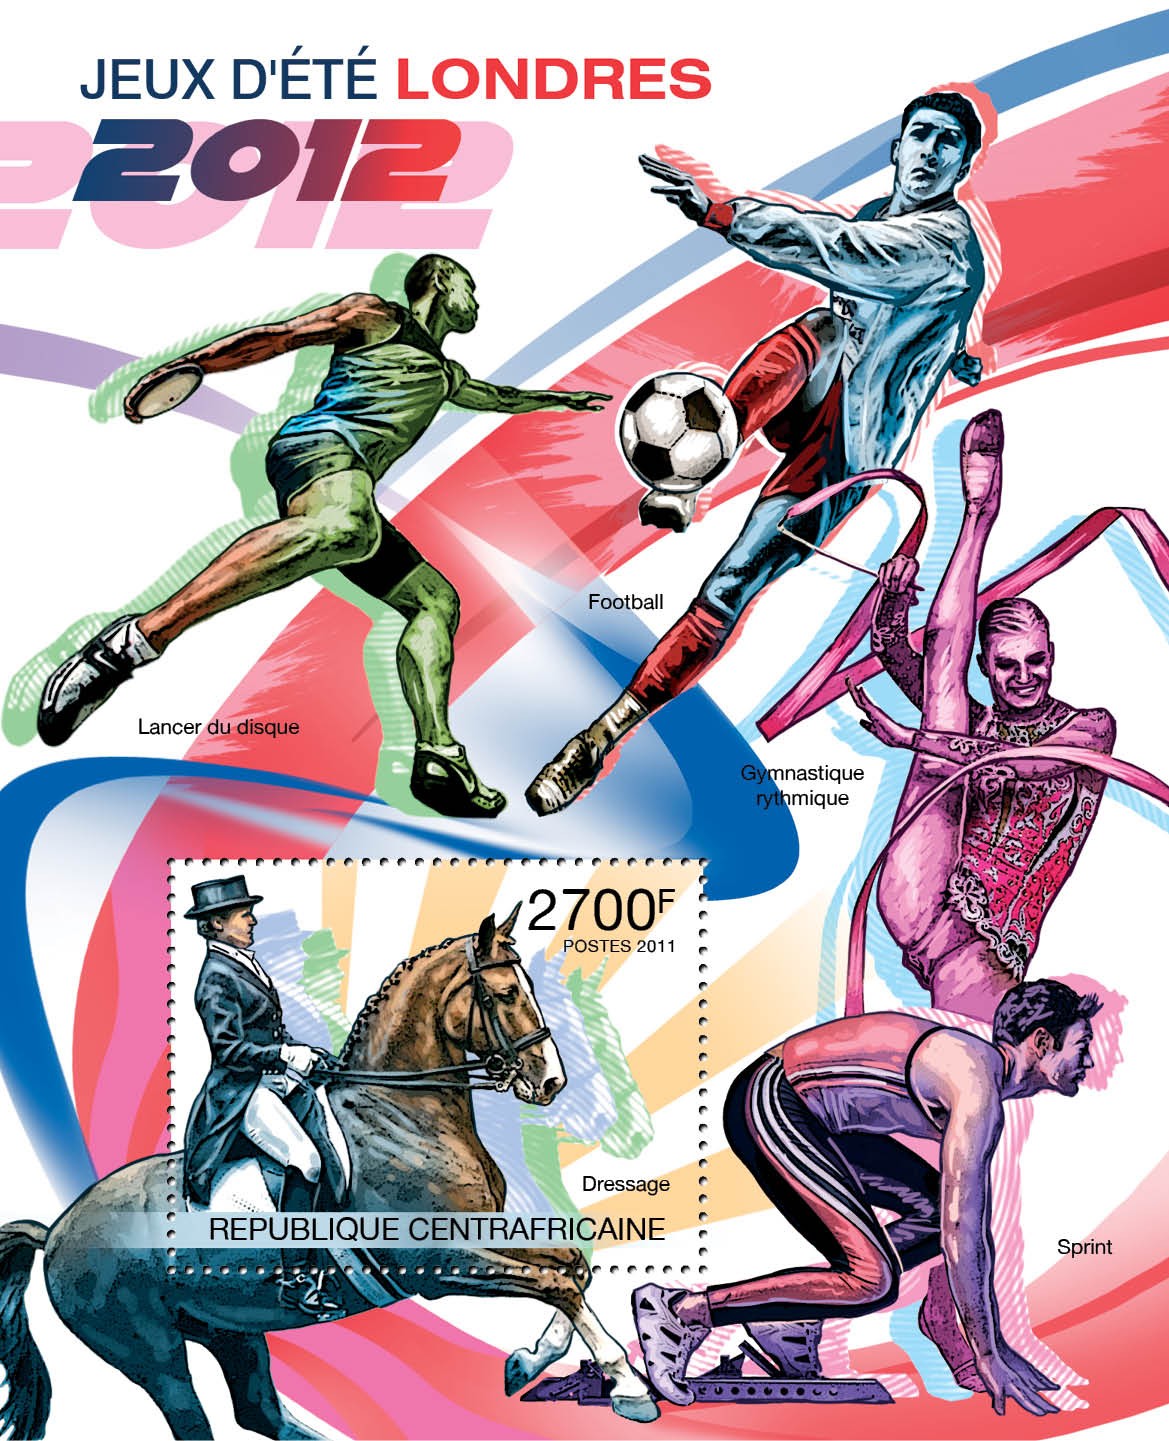 Summer Olympic Games - London 2012. - Issue of Central African republic postage stamps